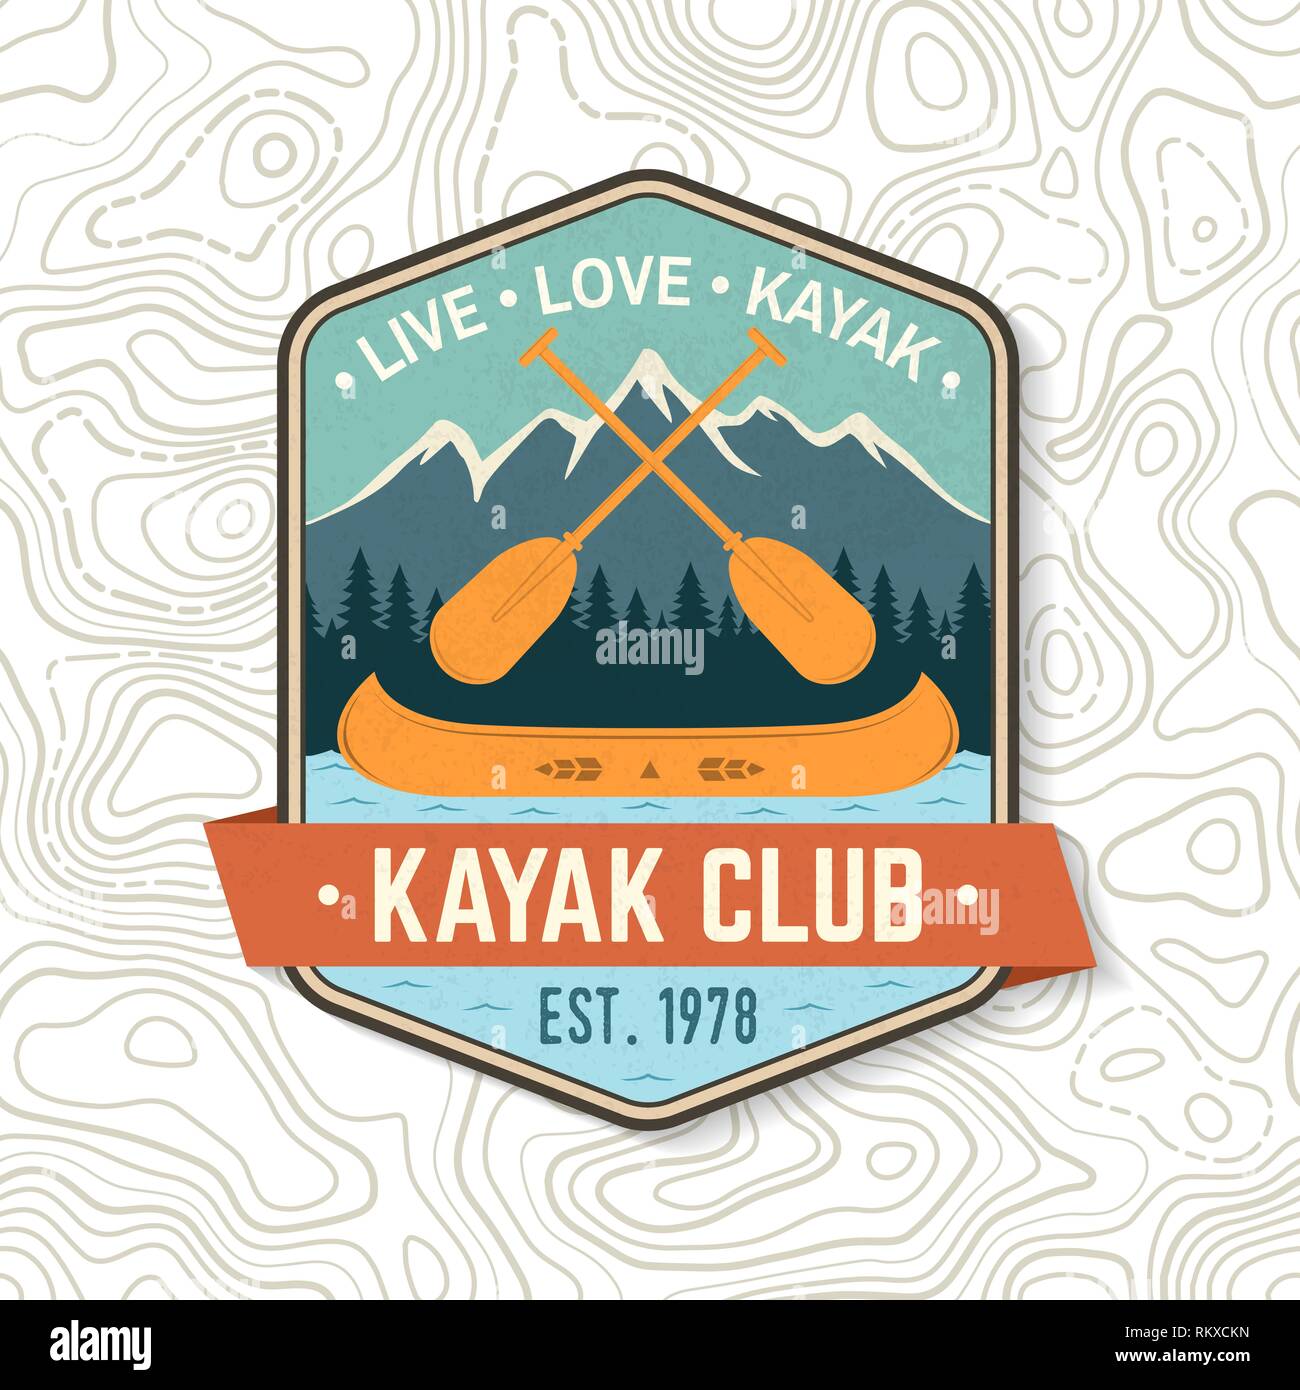 Kayak Club. Live, love, kayak. Vector. Concept for shirt, print, stamp or tee. Vintage design with mountain, paddles and boat silhouette. Extreme water sport. Outdoor adventure emblems patches Stock Vector